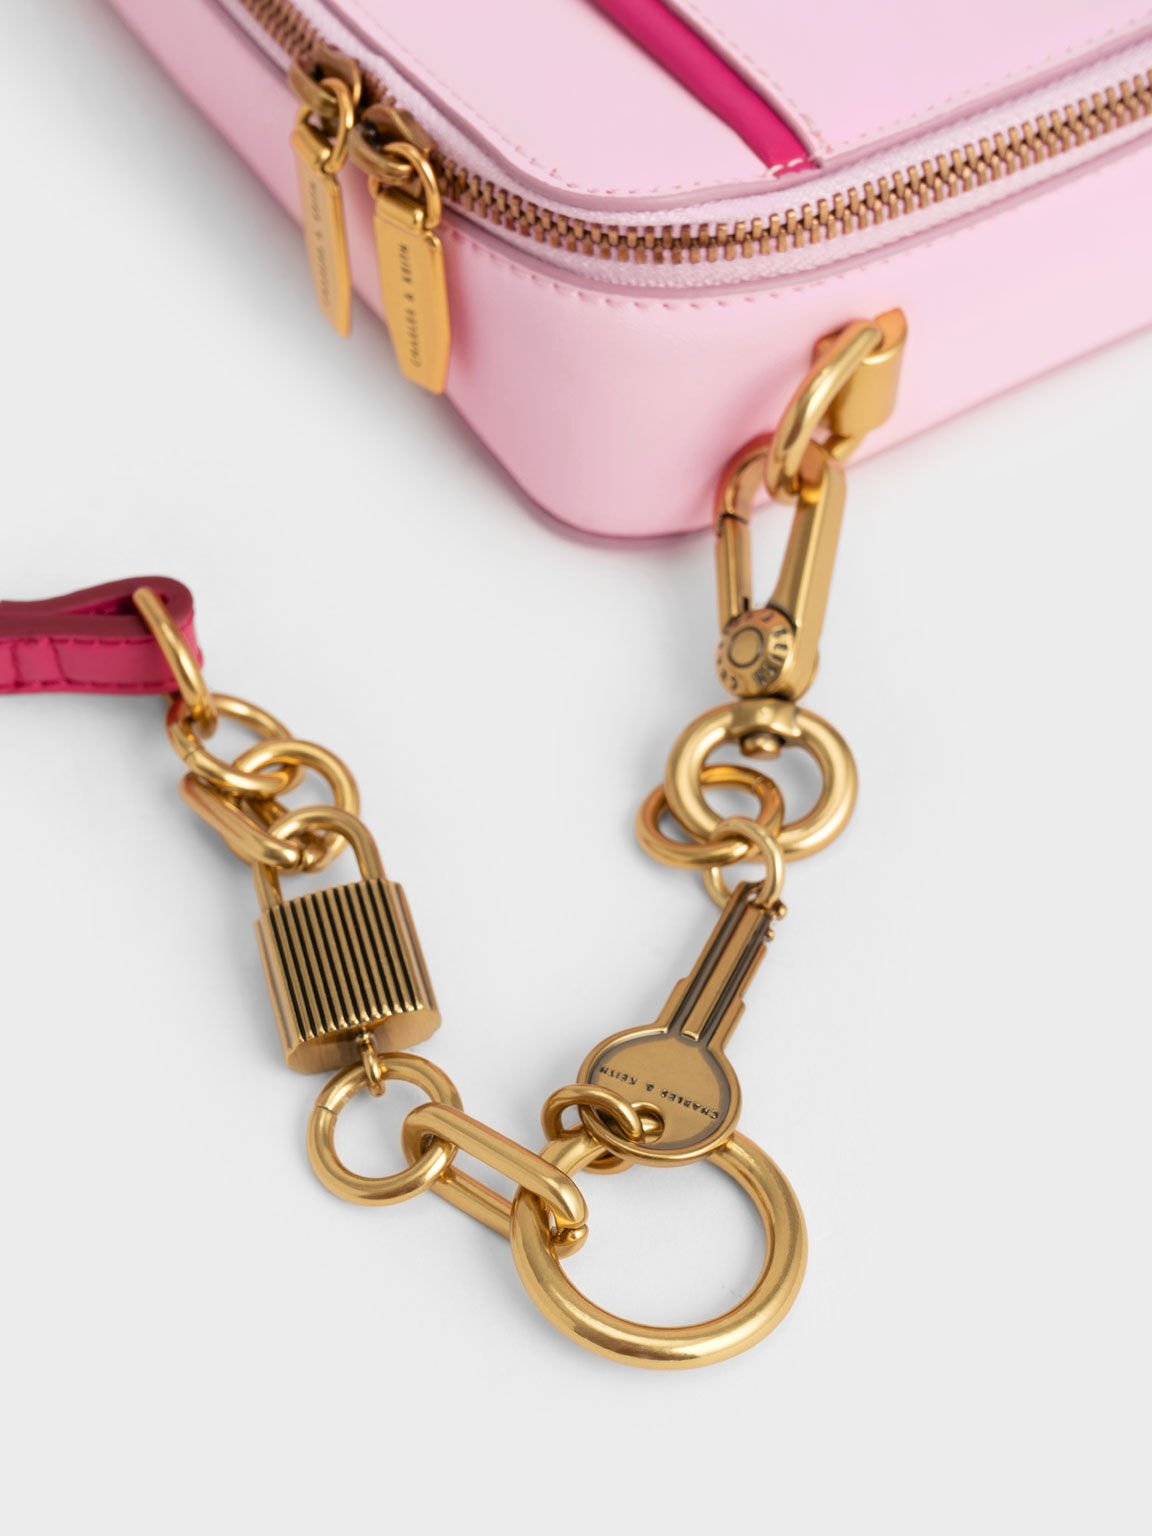 While I'm on hold with Delta… thoughts on the new Dior Key Bag? At least I  think it's new! I think it's so sleek and beautiful. : r/handbags